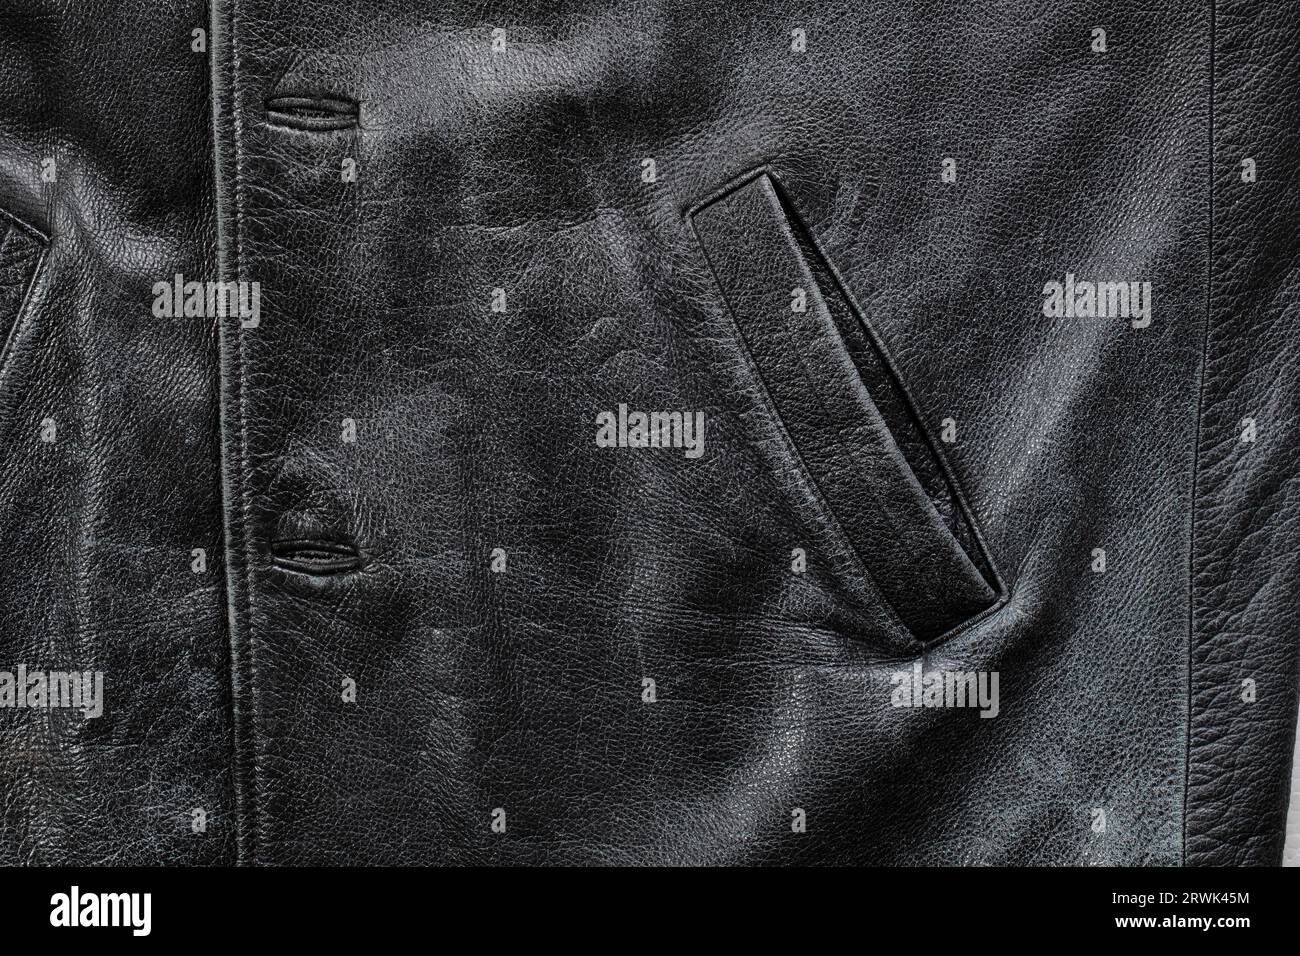 Pocket detail of an old black worn leather jacket Stock Photo